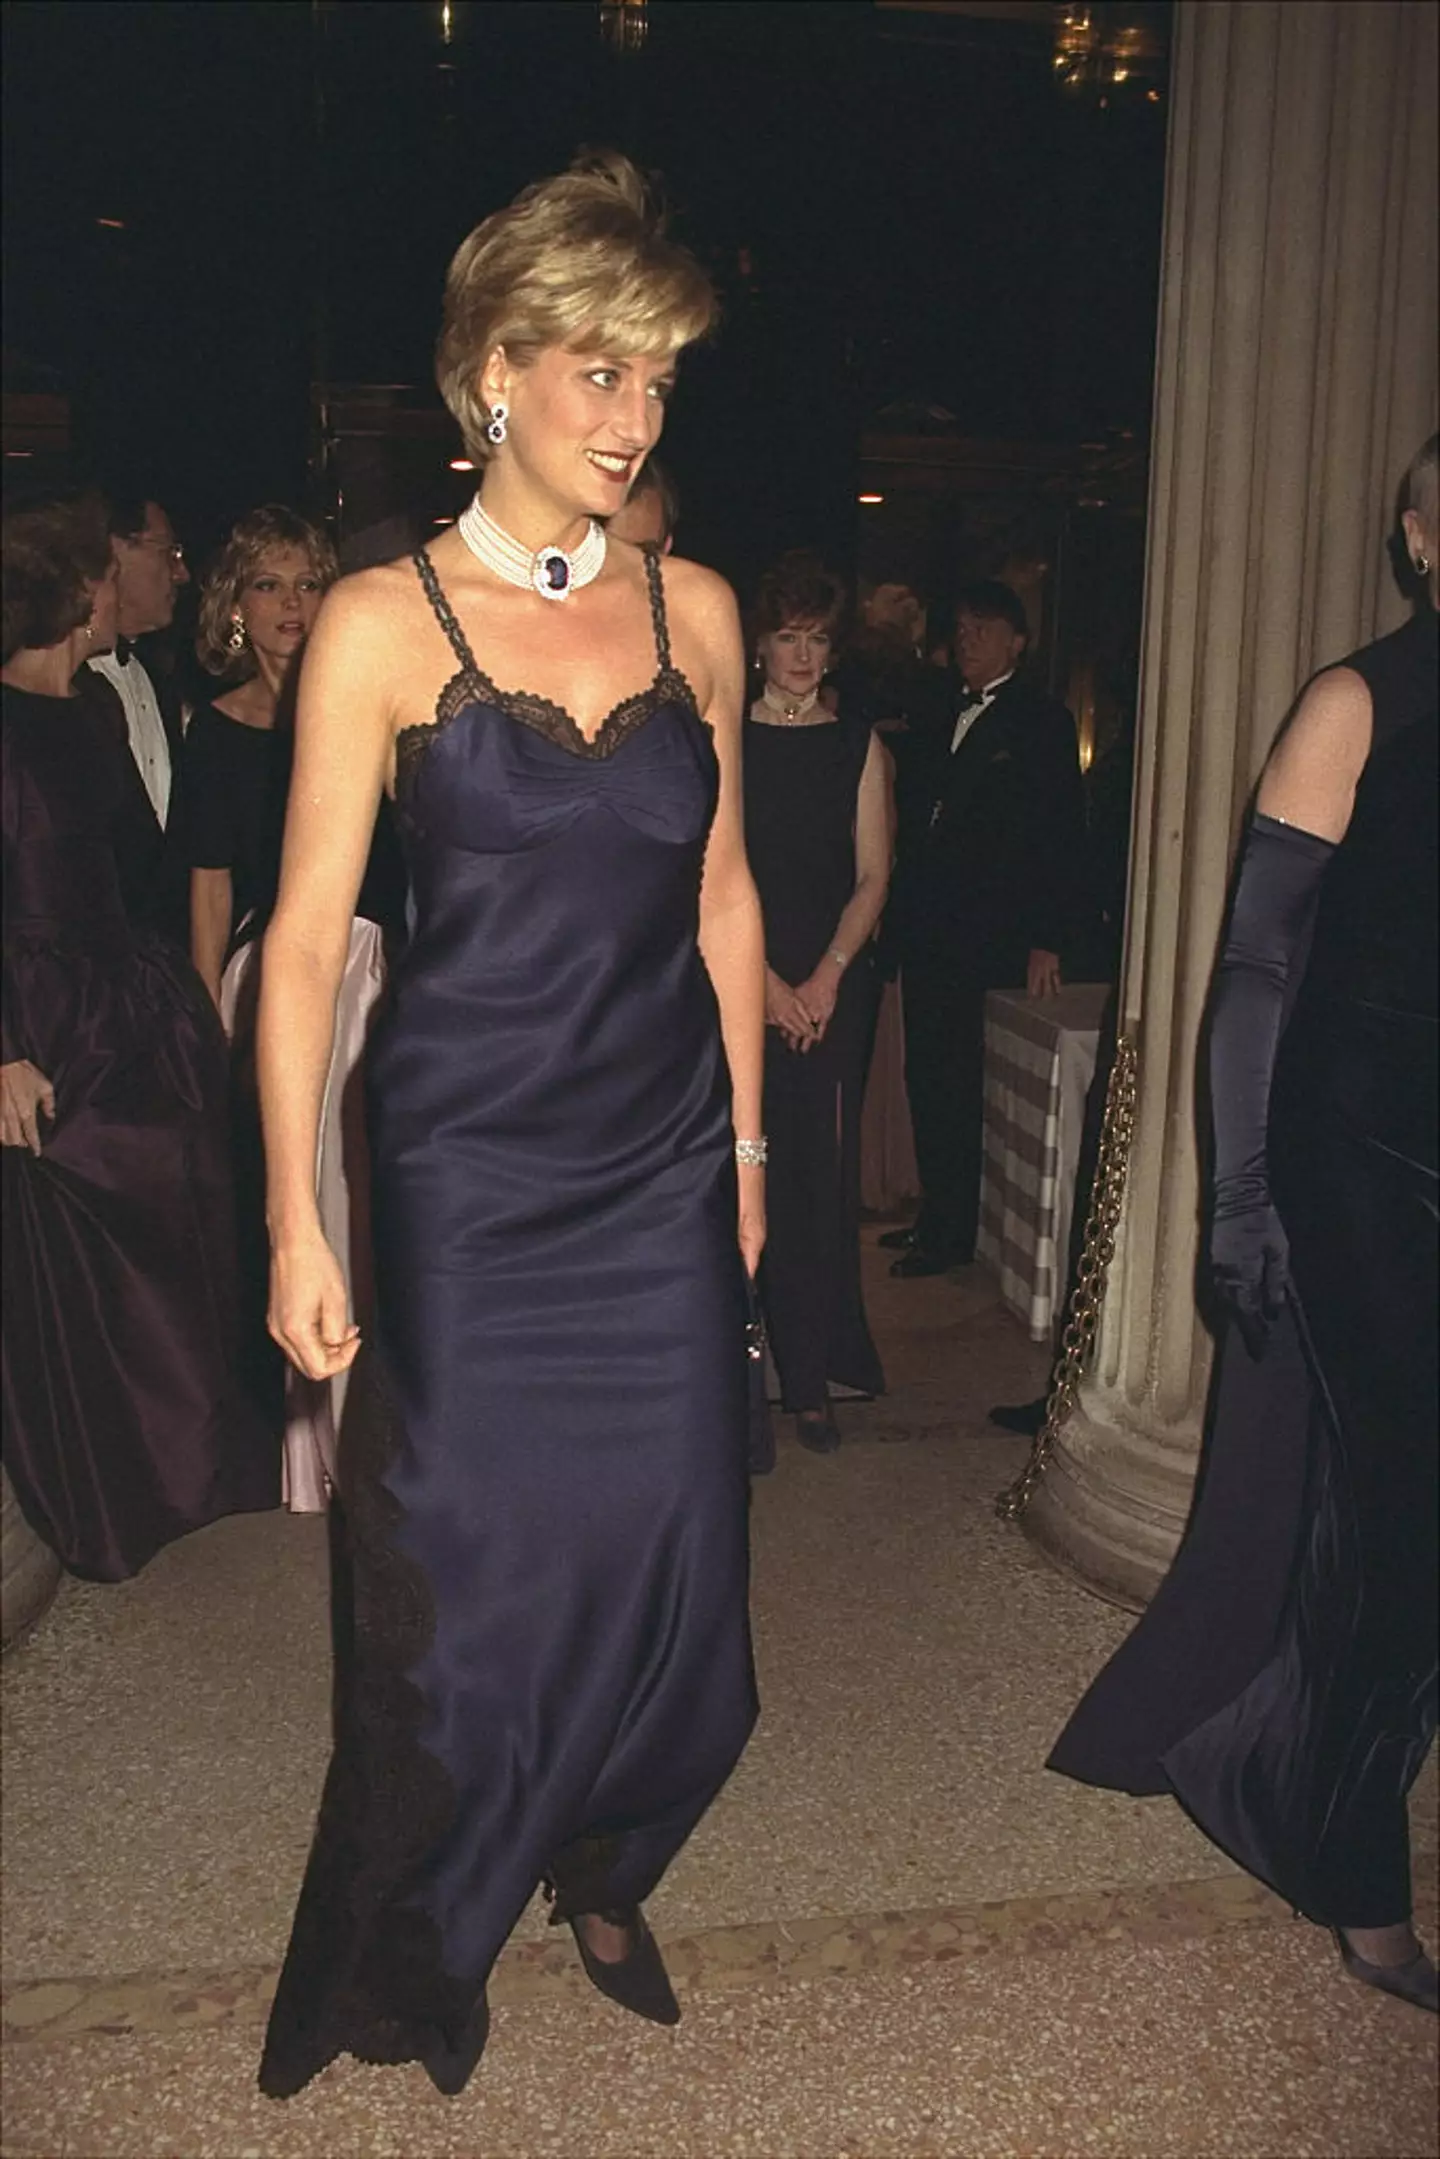 Princess Diana in Dior at the 1996 Met Gala. (Richard Corkery/NY Daily News via Getty Images)